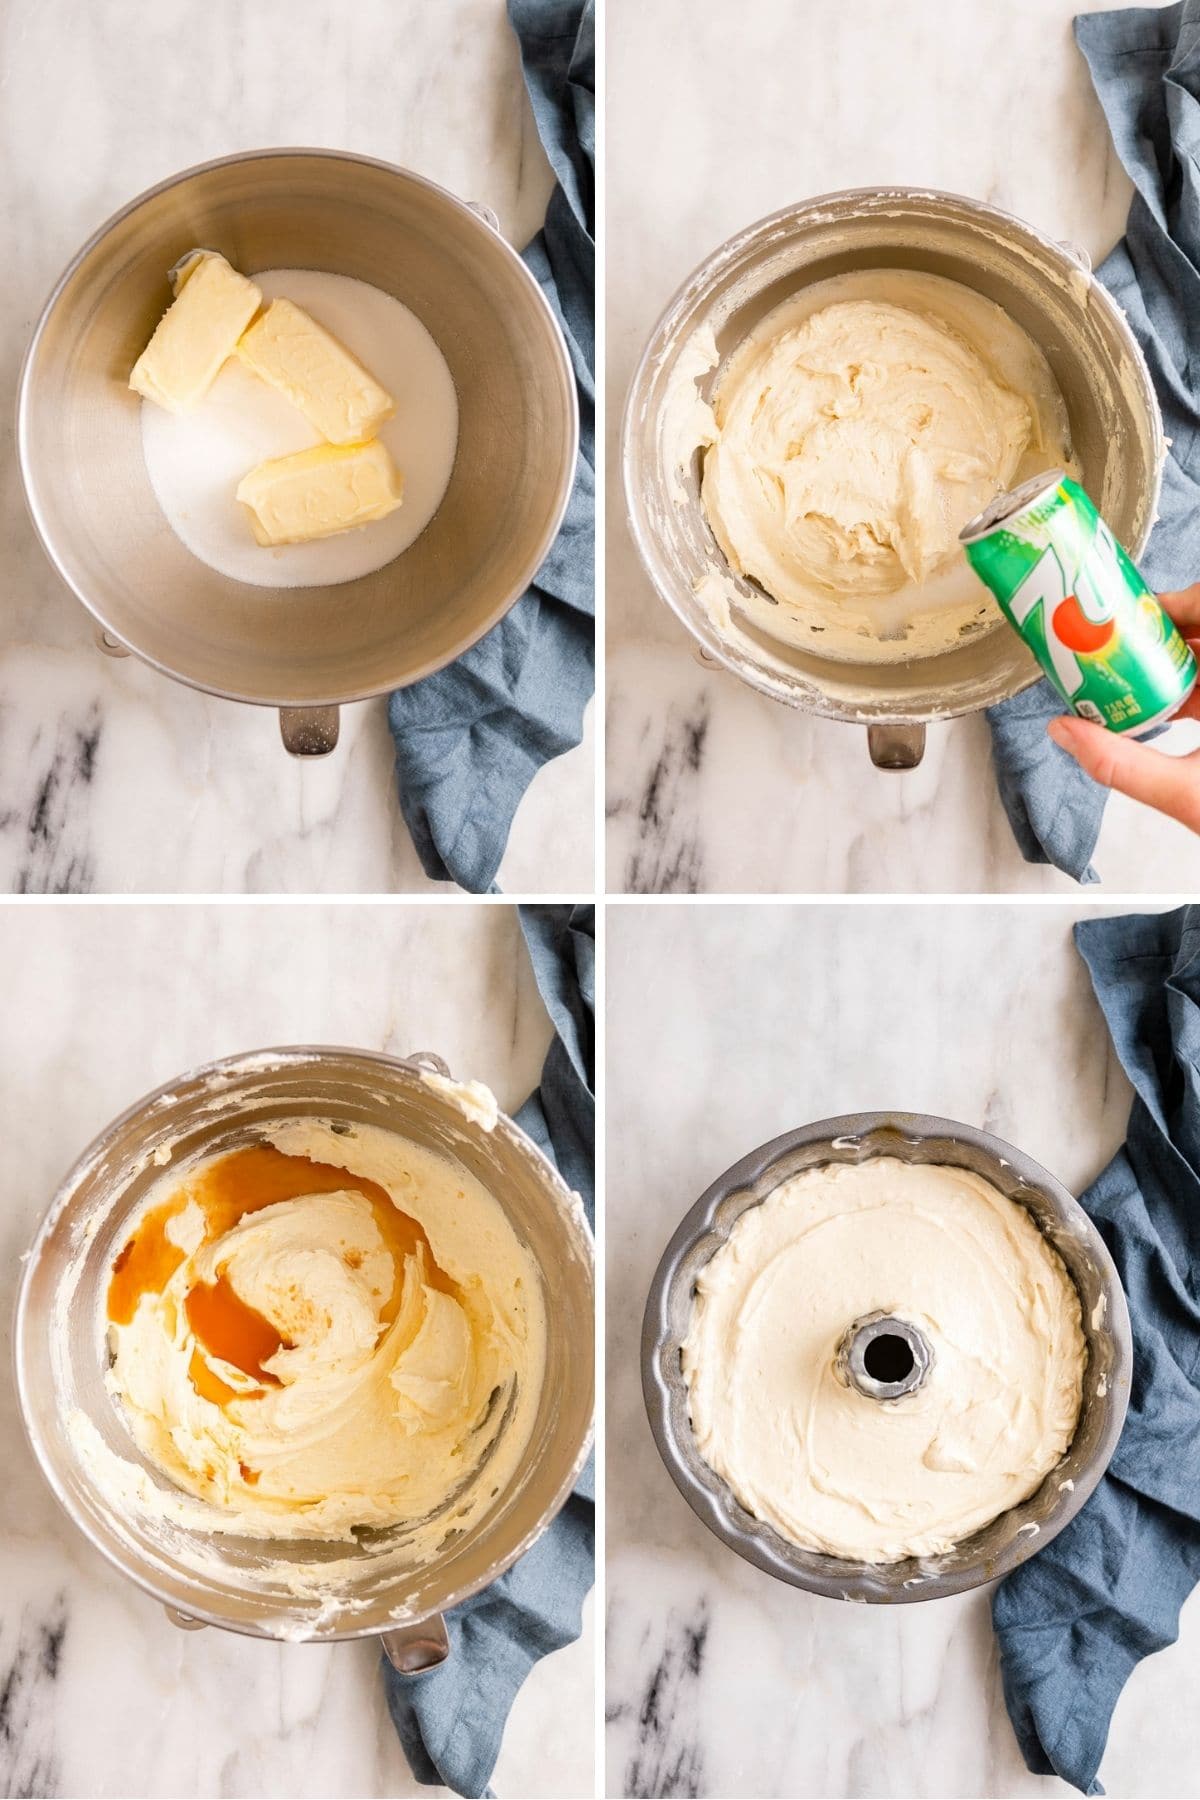 7up Pound Cake batter in mixing bowl preparation collage